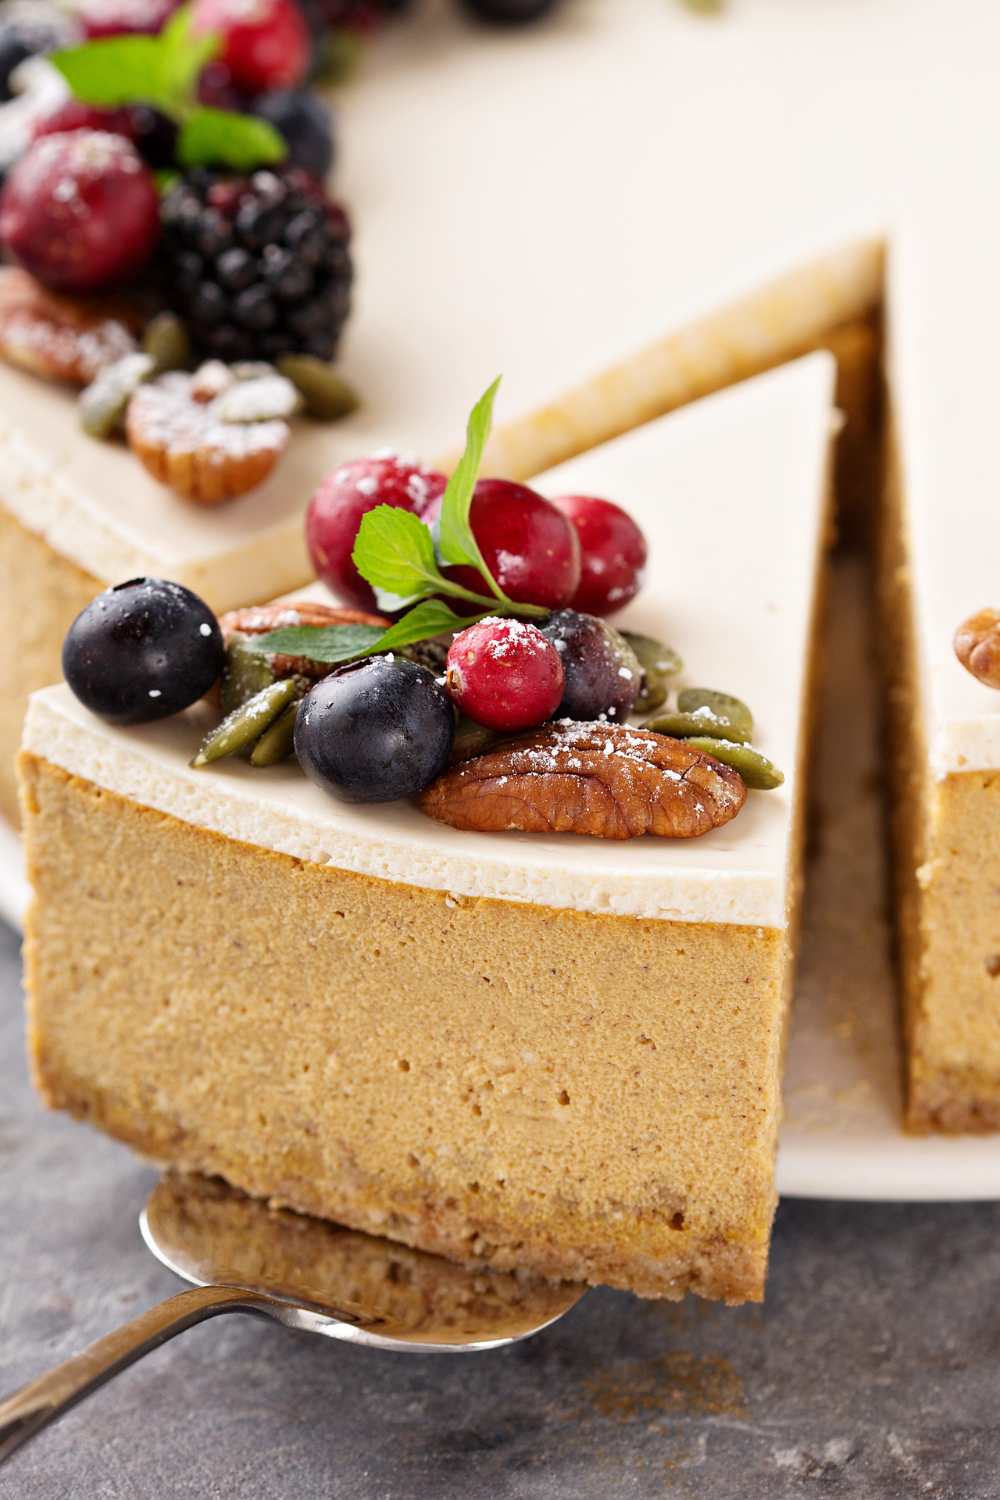 Cheesecake Recipes With Sour Cream